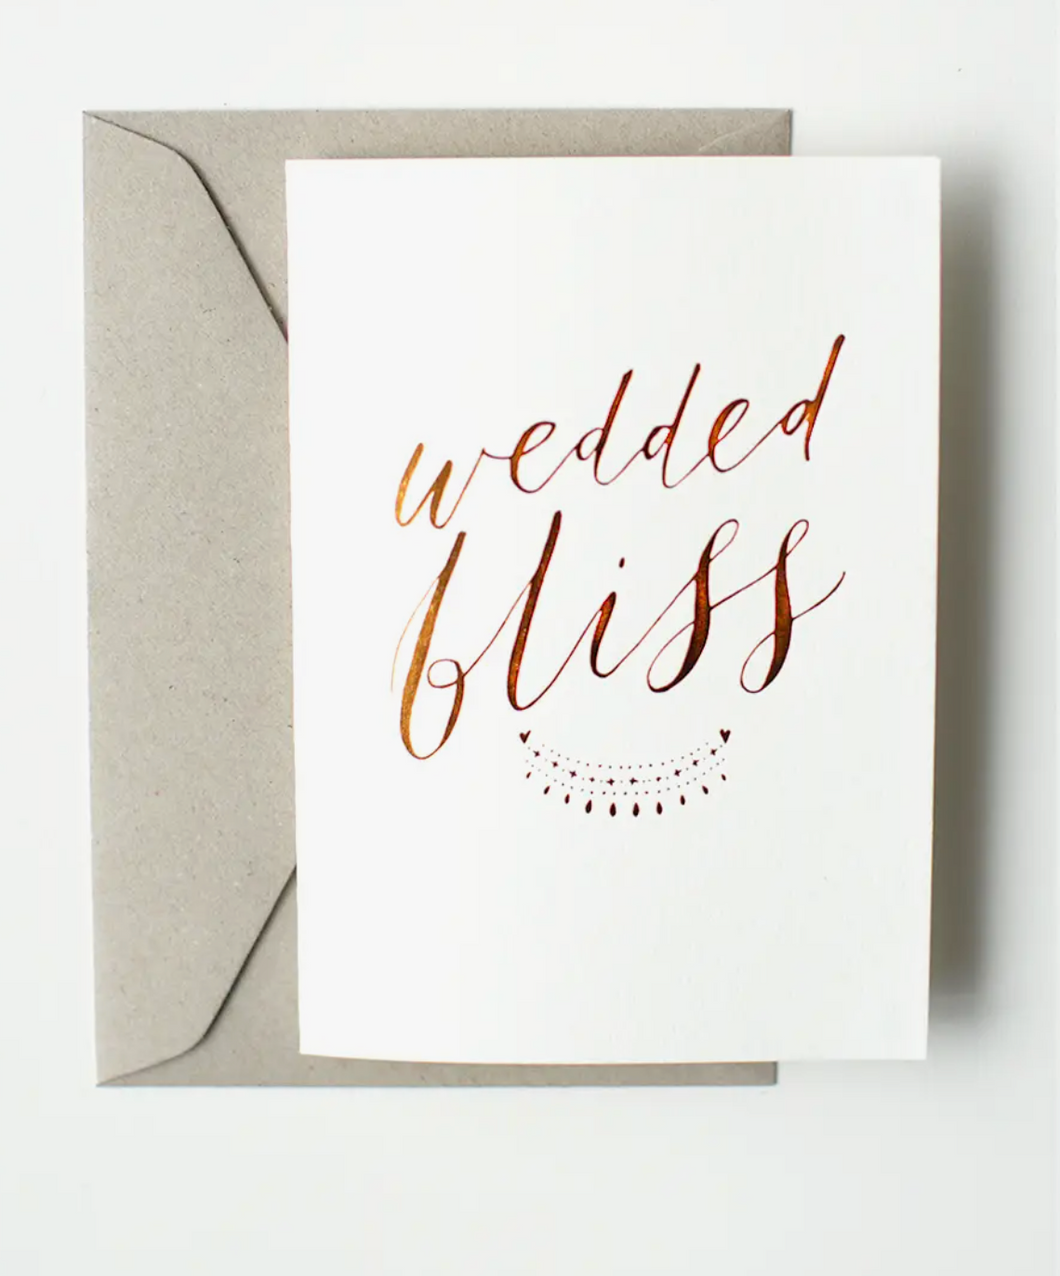 Wedded Bliss - Copper Foil Greeting Card